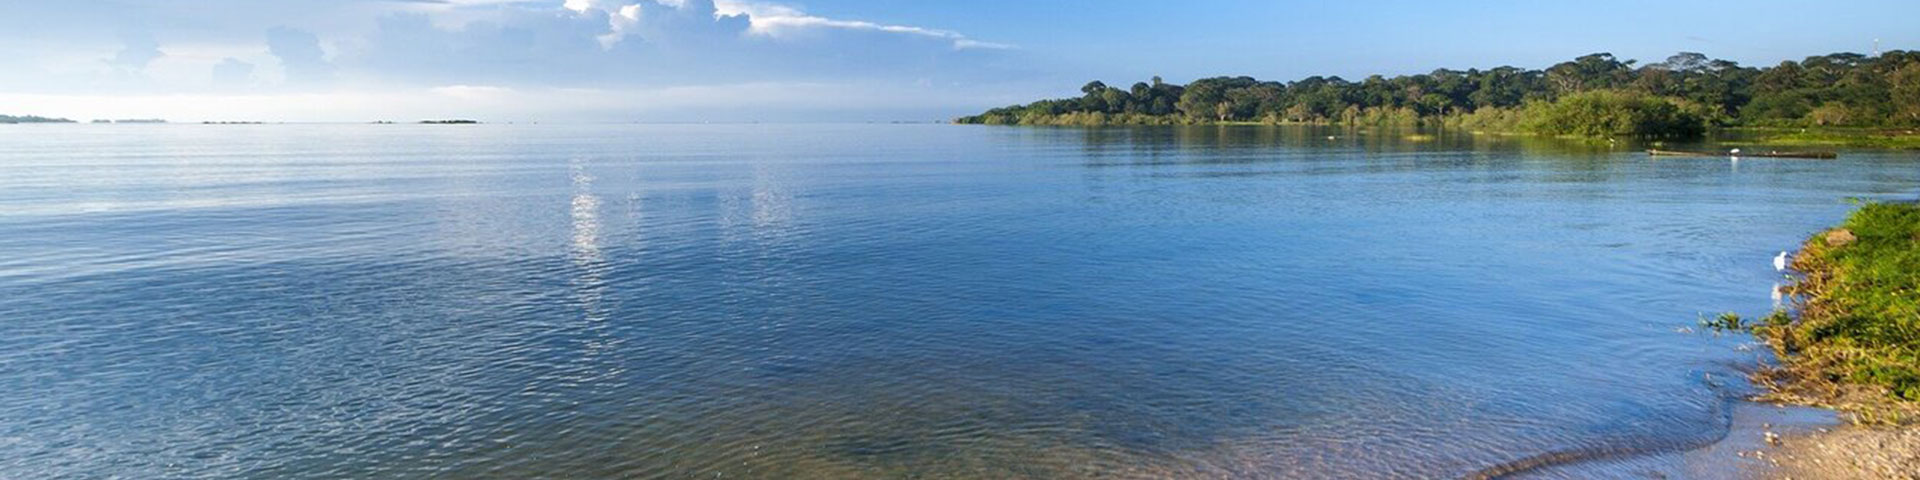 The wooded shore of Lake Victoria.